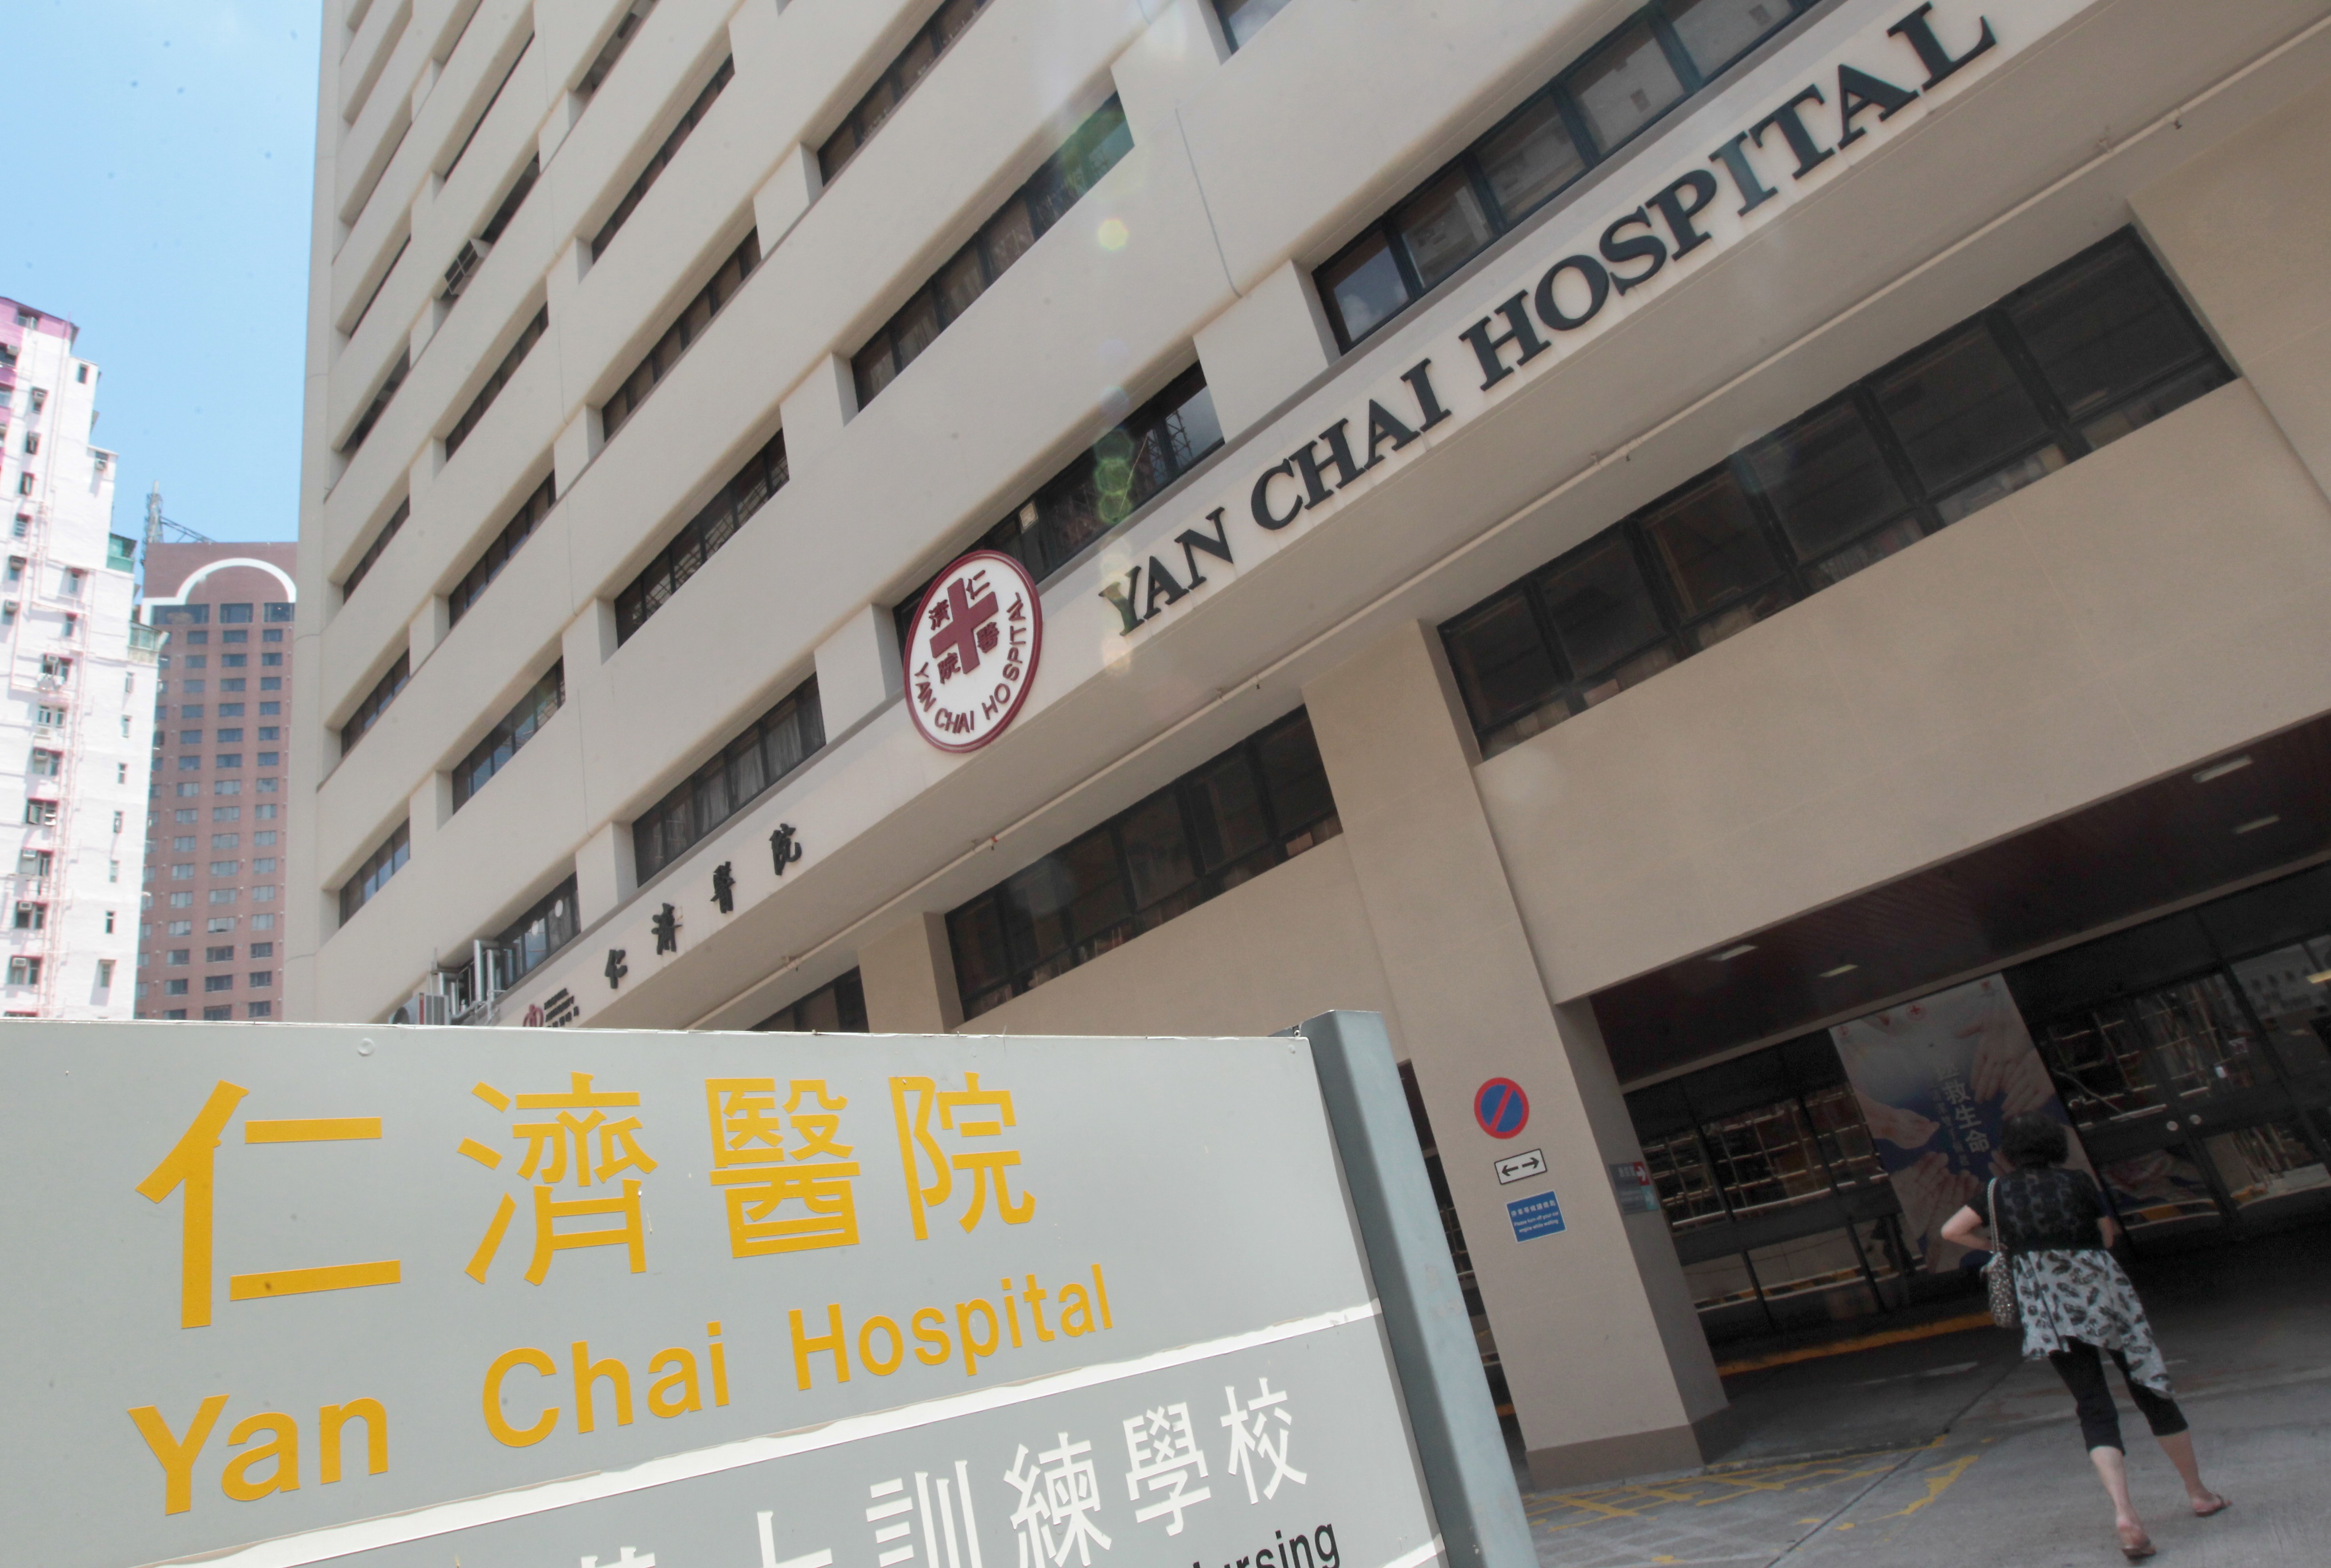 The elder woman was declared dead after being brought to Yan Chai Hospital. Photo: K.Y. Cheng